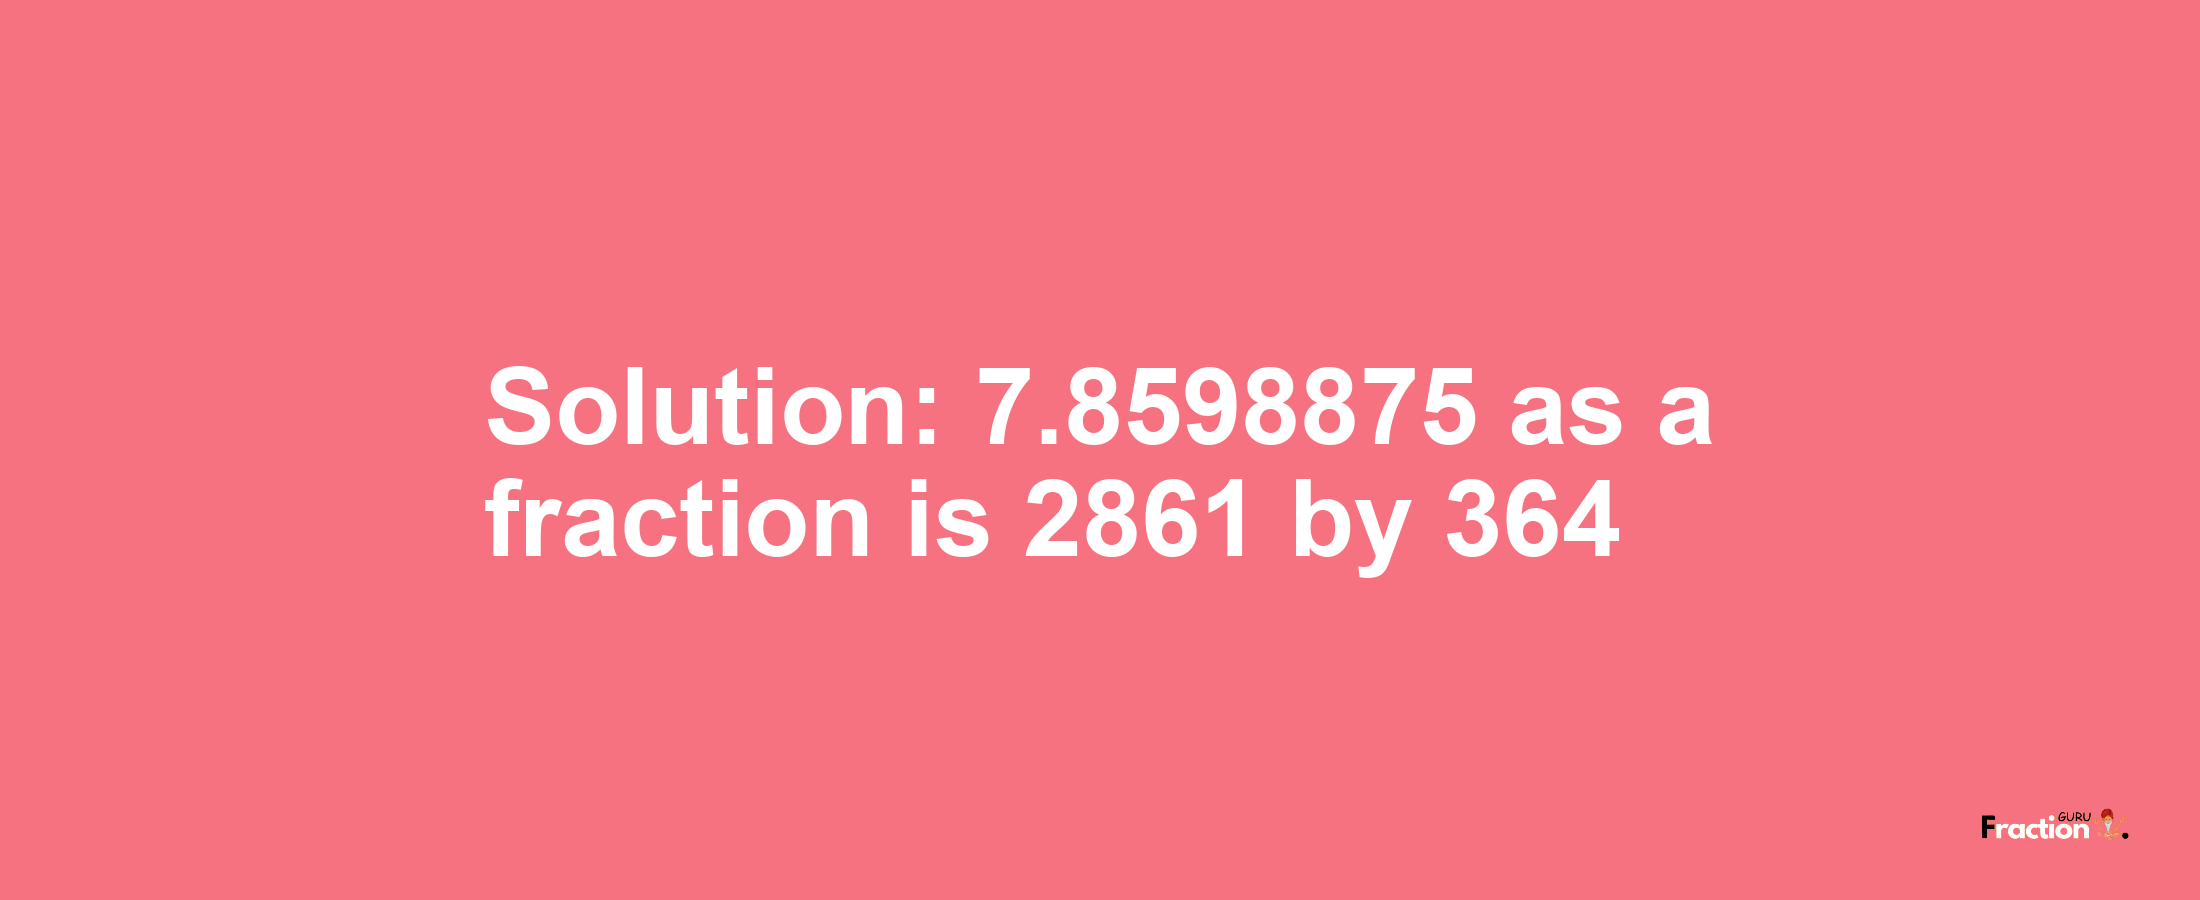 Solution:7.8598875 as a fraction is 2861/364